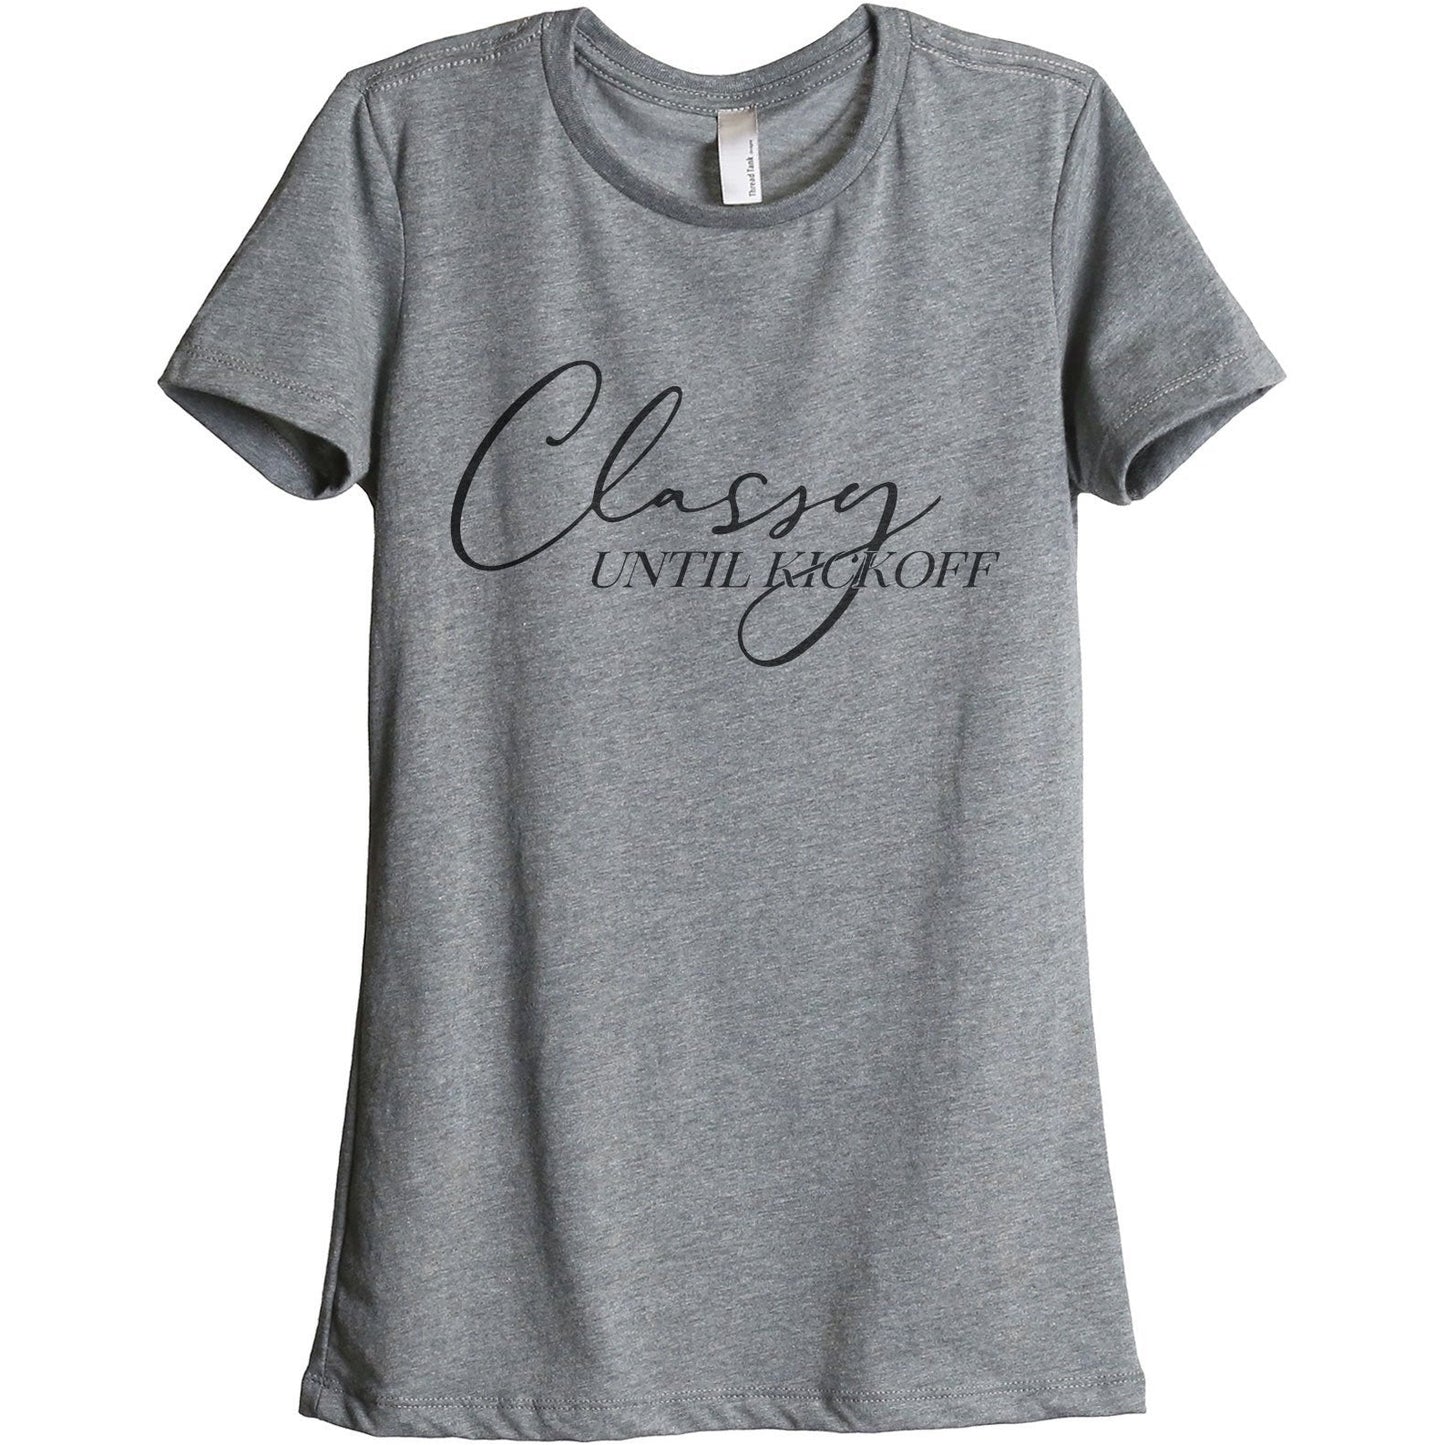 Classy Until Kickoff Women's Relaxed Crewneck T-Shirt Top Tee Heather Grey